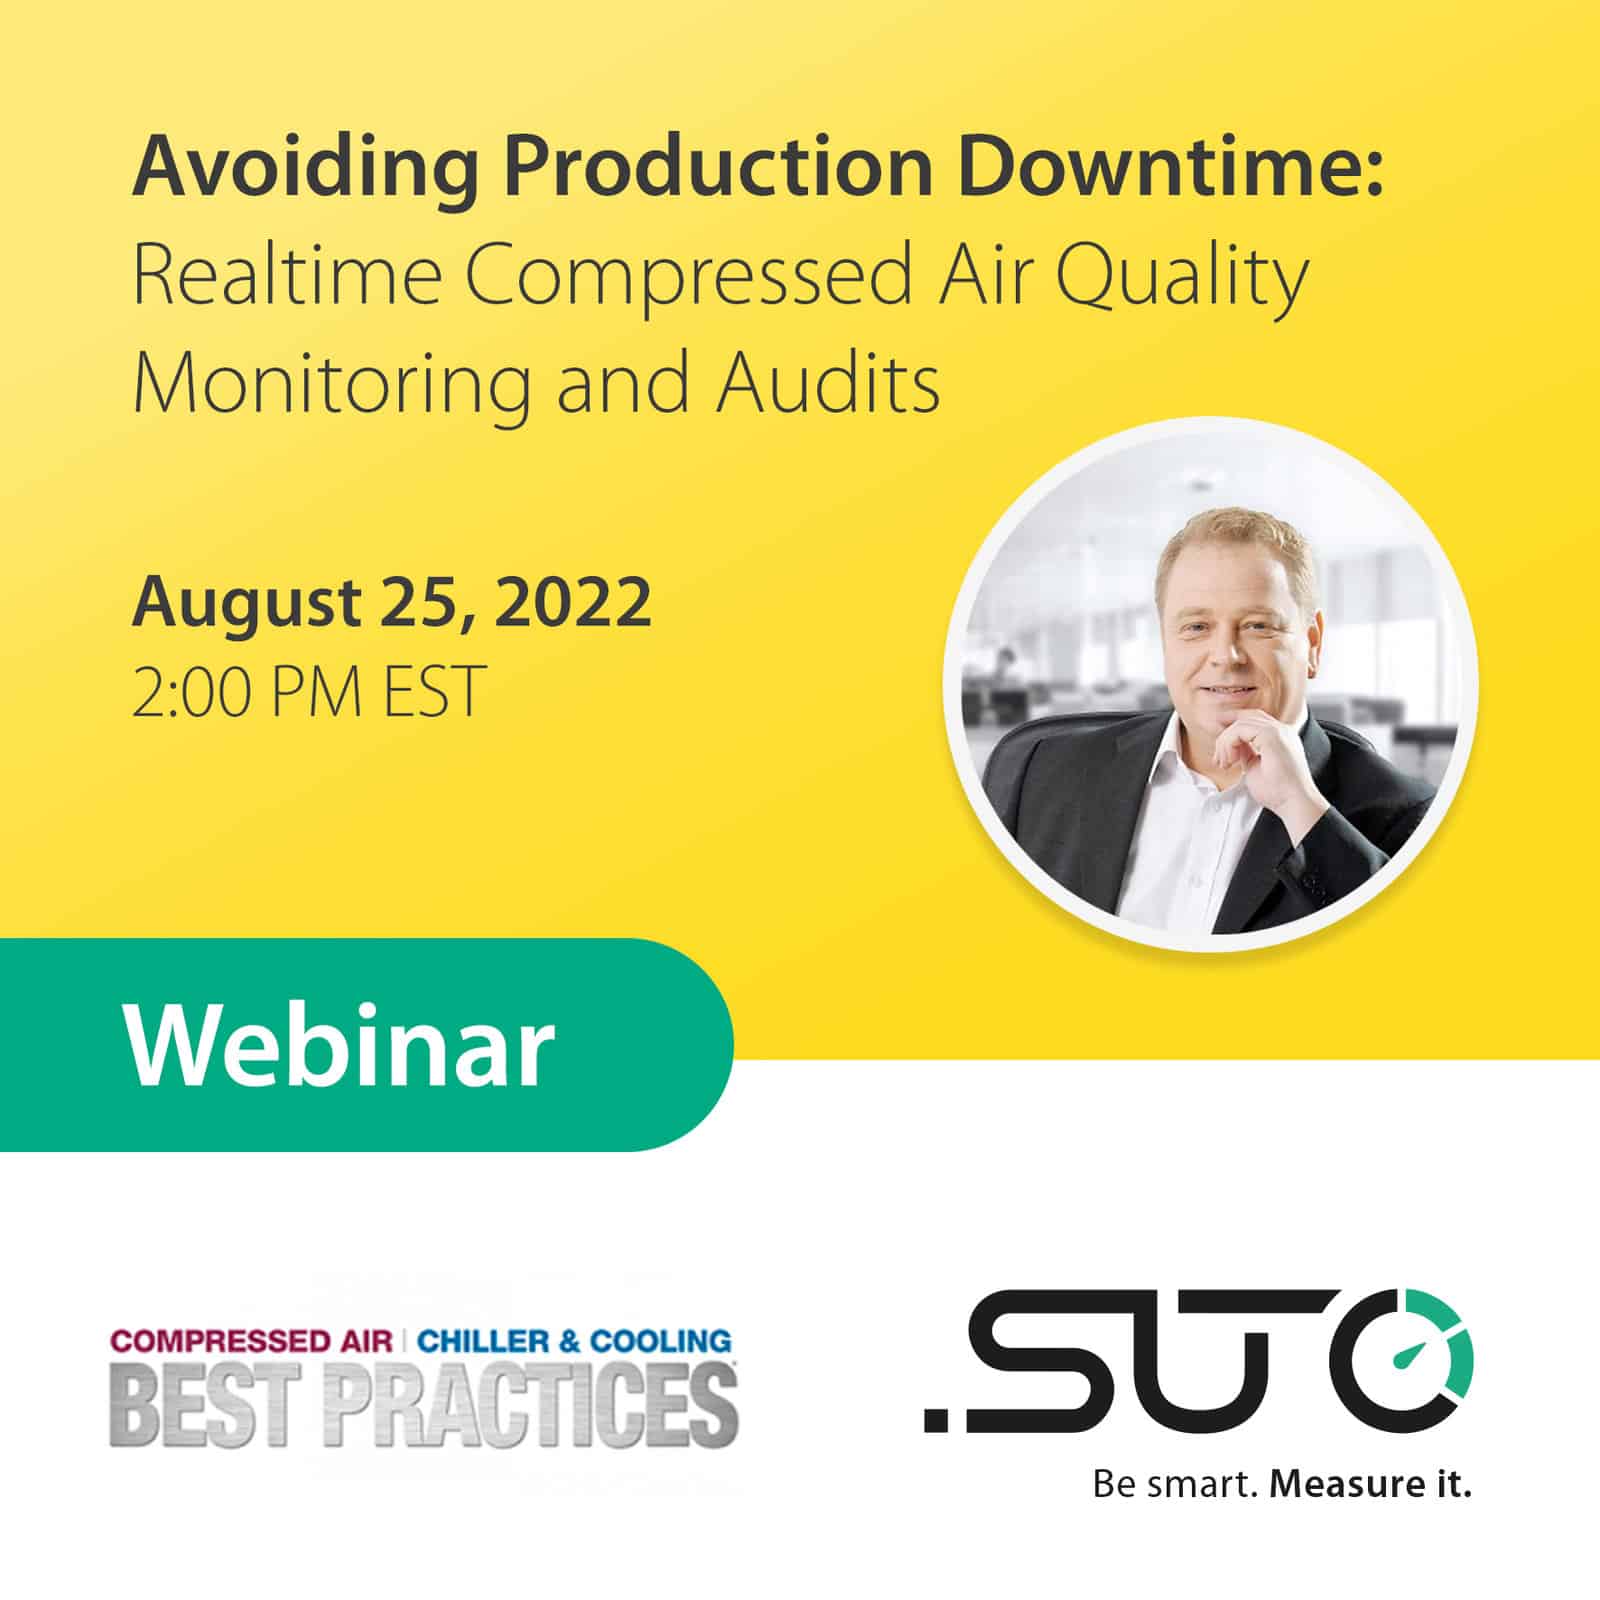 UPCOMING WEBINAR: “AVOIDING PRODUCTION DOWNTIME” WITH CABP MAGAZINE ON AUGUST 25TH, 2022